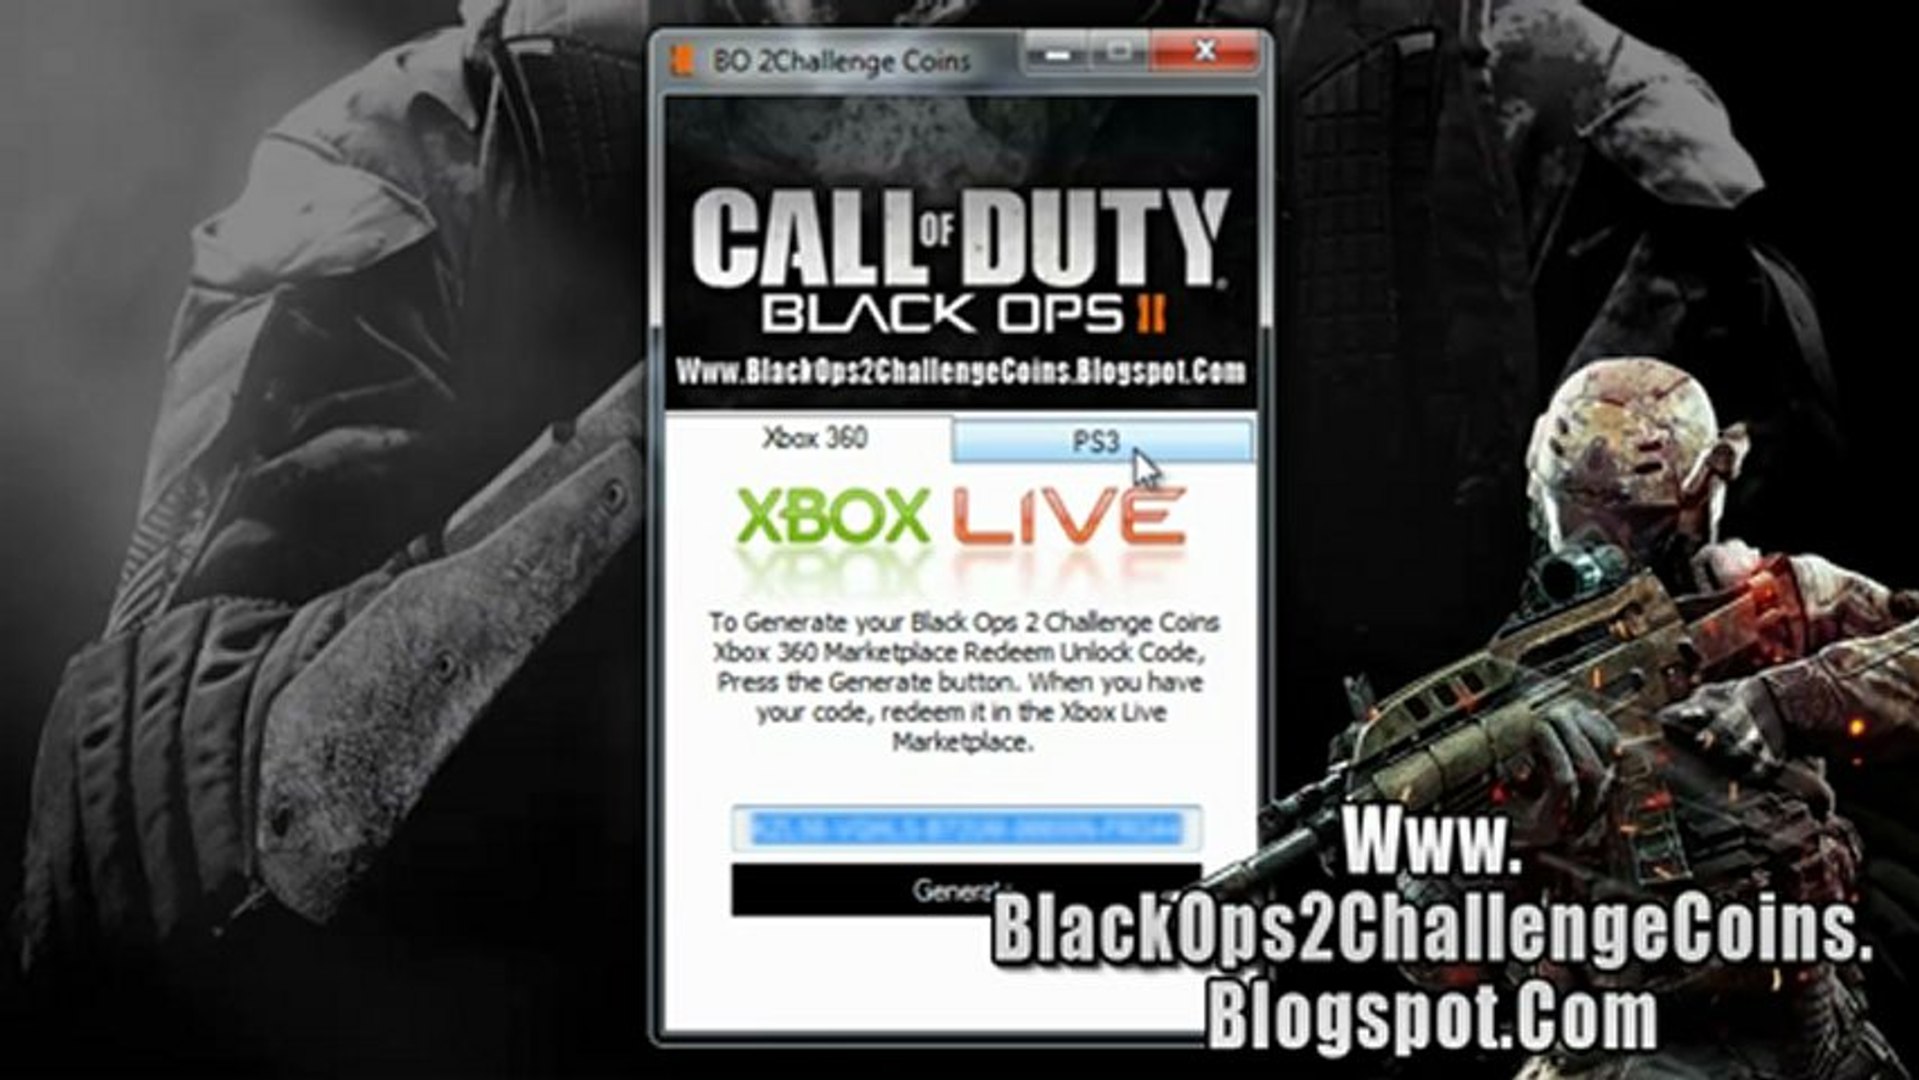 Black Ops 2 Challenge Coins Redeem Code Free Xbox 360 - PS3 - video  Dailymotion